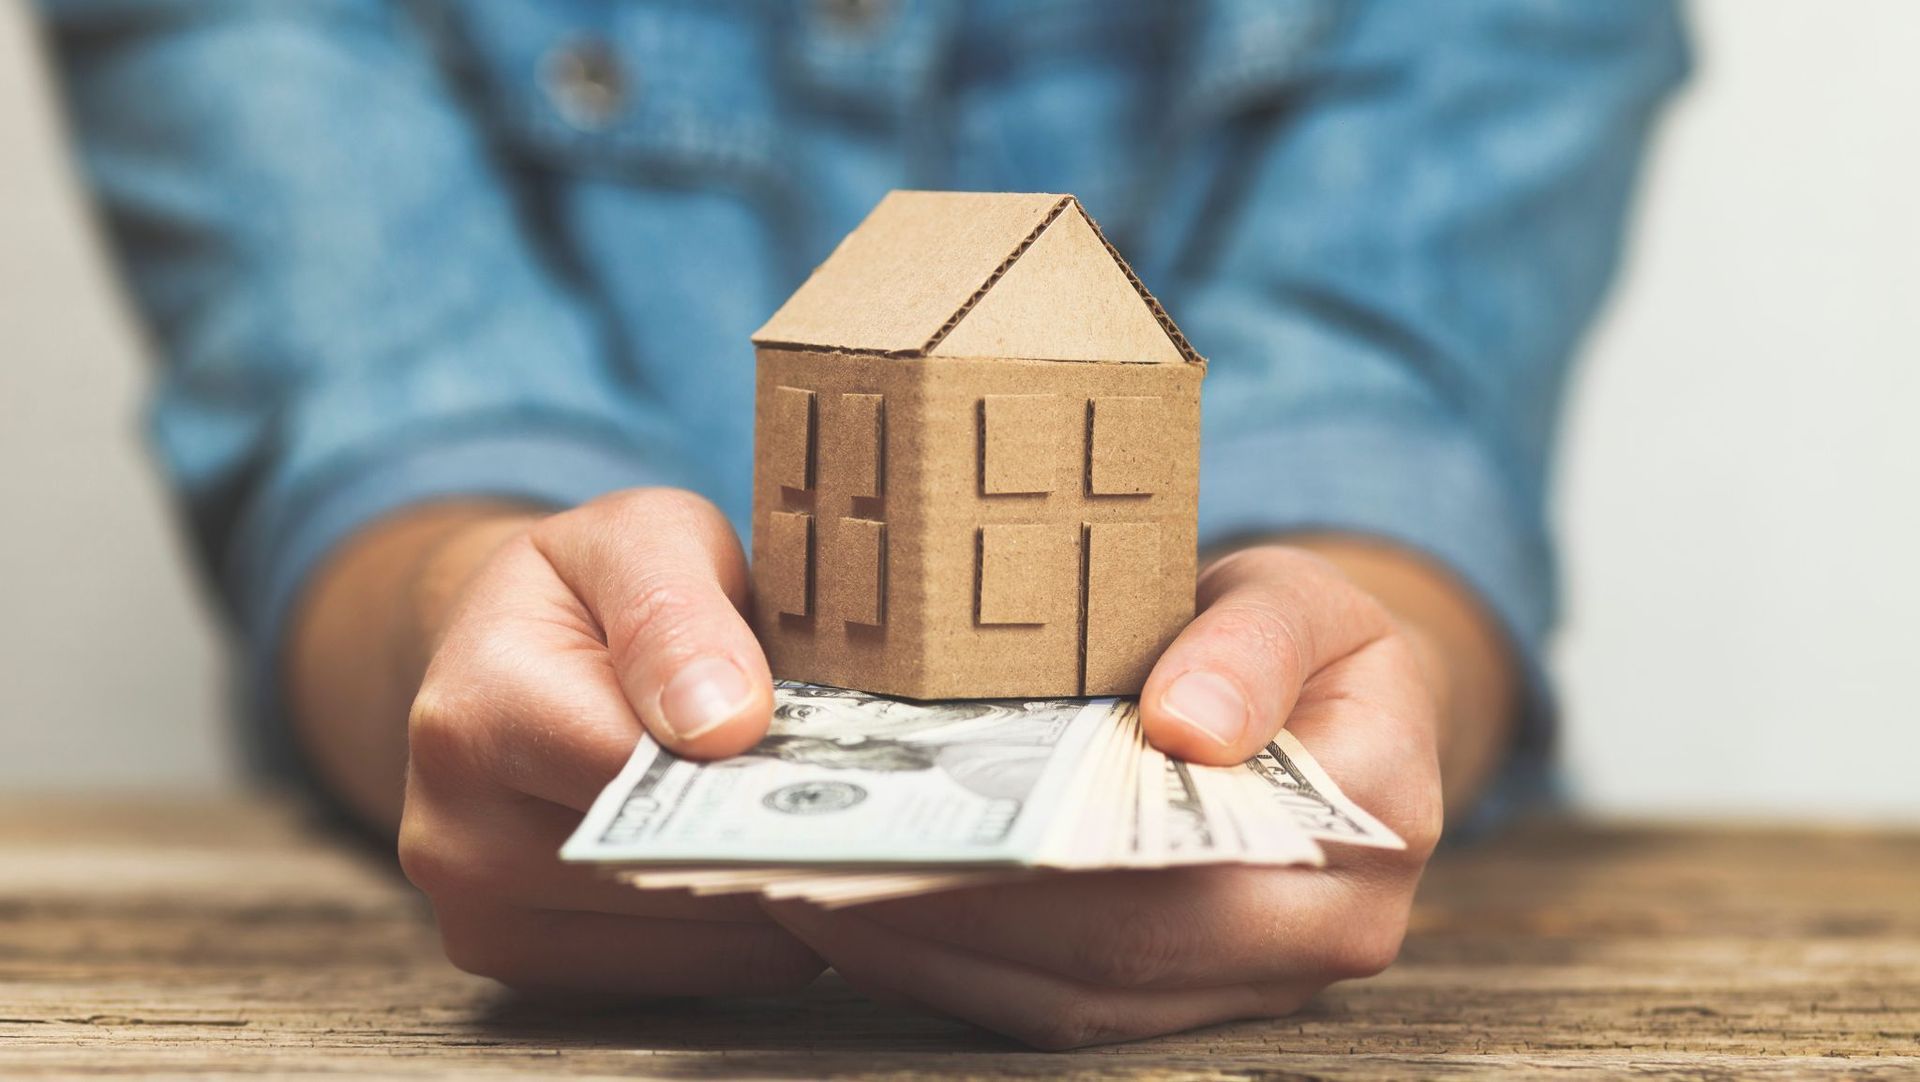 A person holding a small cardboard house model above a stack of money, symbolizing real estate investment or home savings.